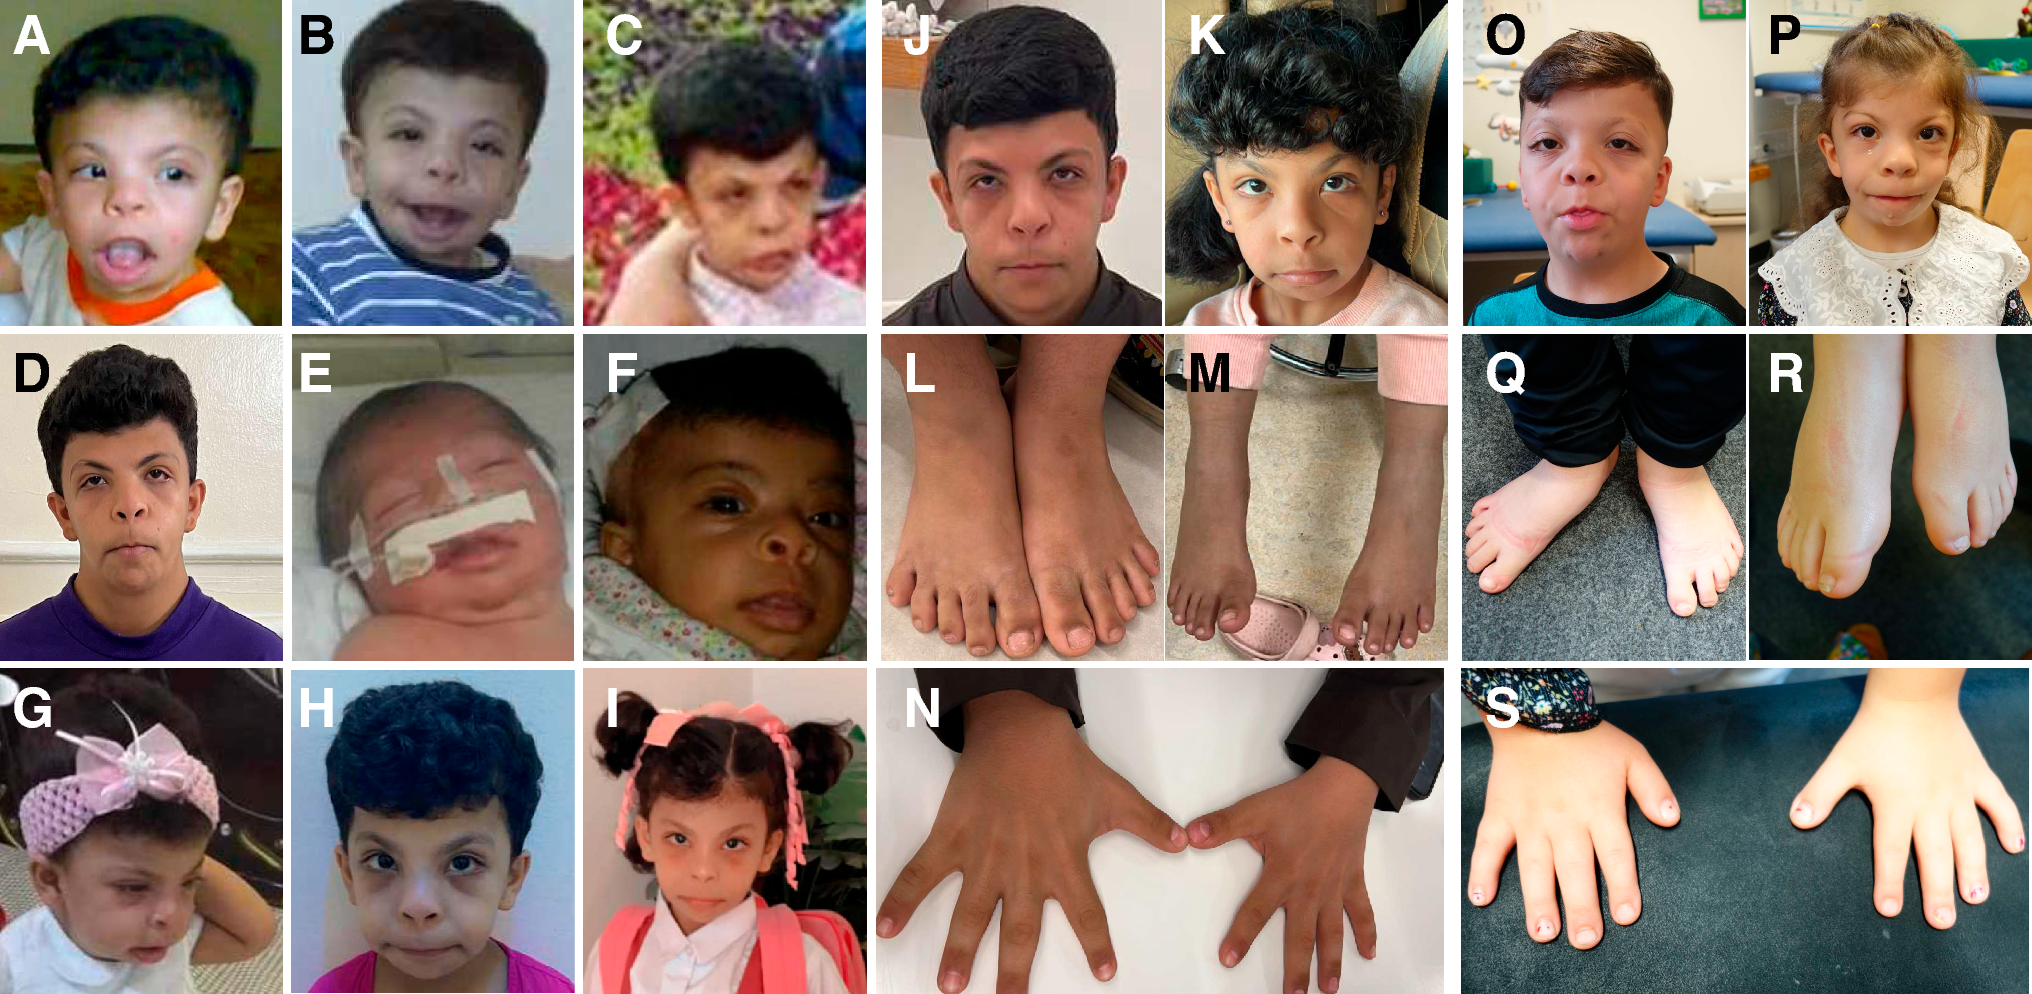 Human ABL1 deficiency syndrome (HADS) is a recognizable syndrome distinct from ABL1-related congenital heart defects and skeletal malformations syndrome